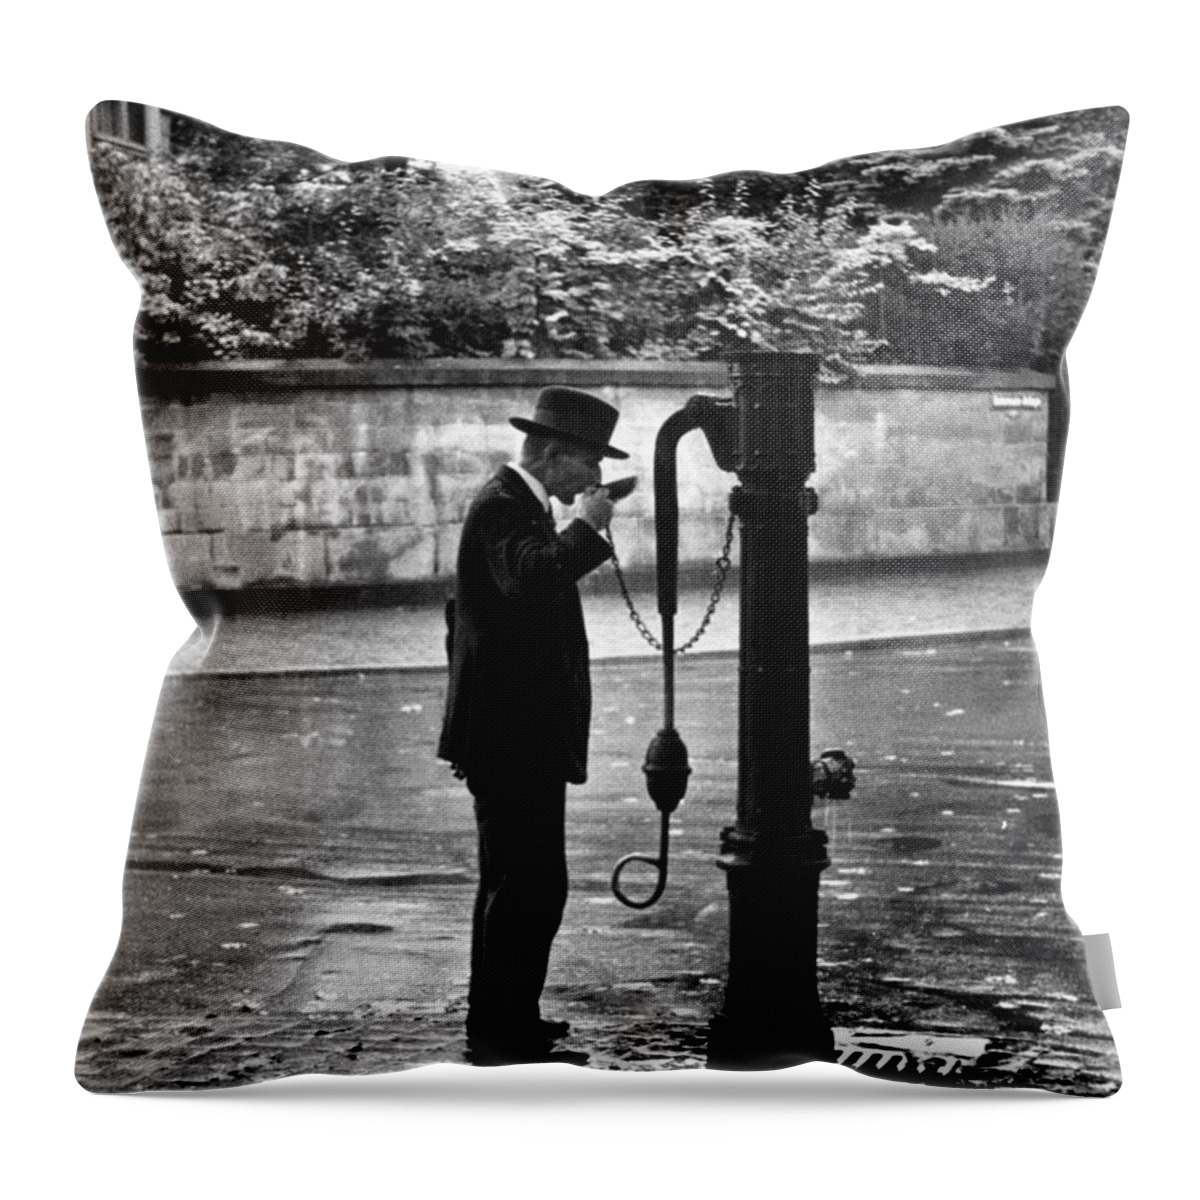 Germany Throw Pillow featuring the photograph Water Fountain by Alfred Eisenstaedt